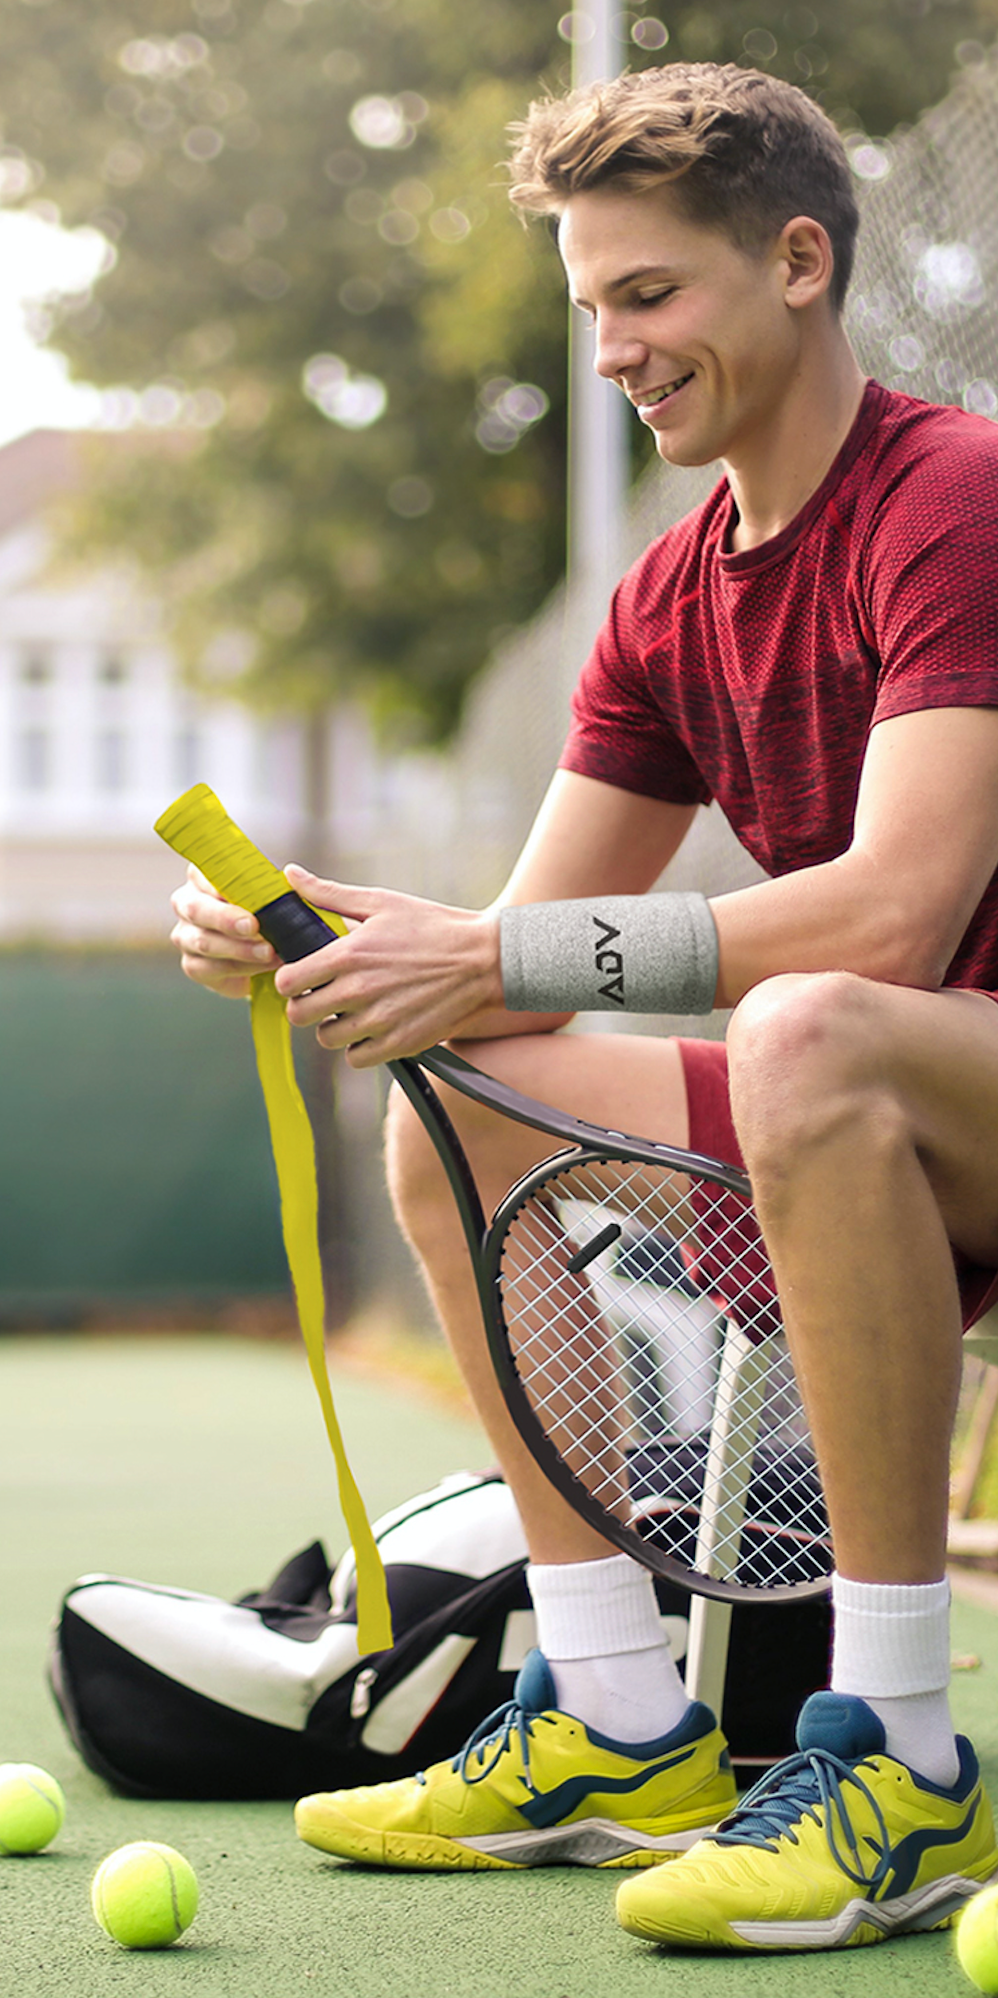 A young athlete sitting on a bench and wrapping a grip tape on a tennis racket